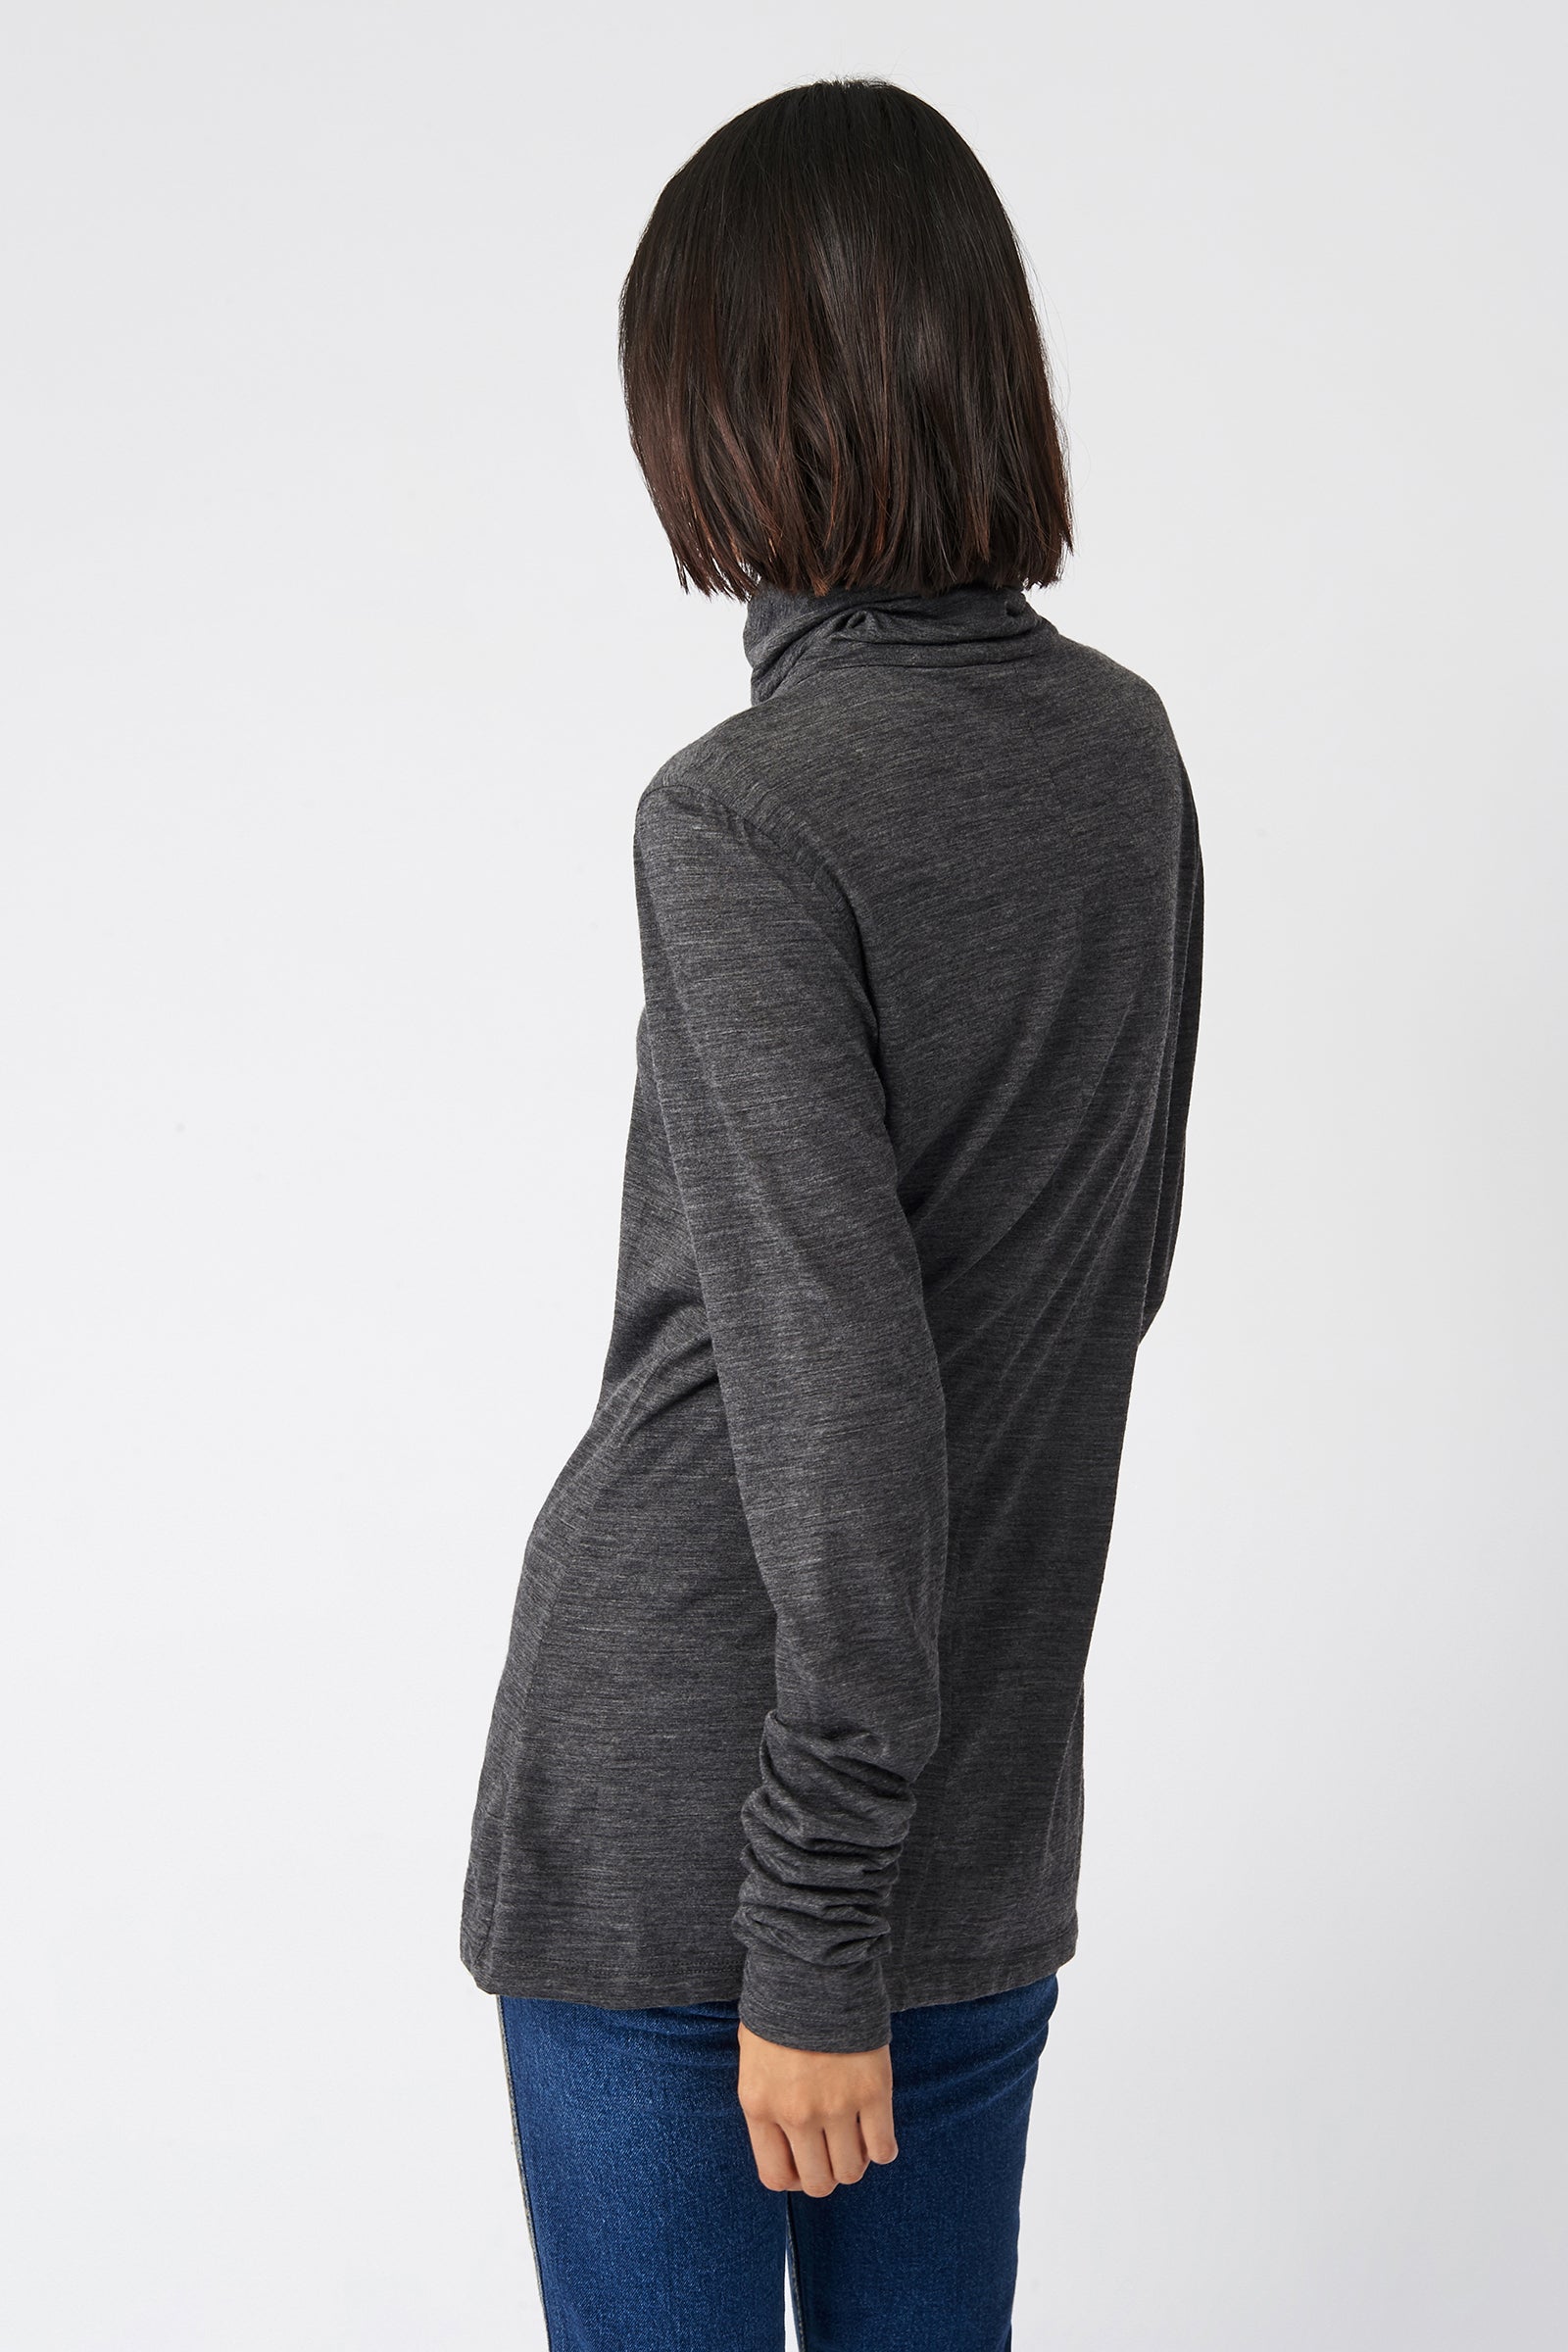 Kal Rieman Fitted Turtleneck in Charcoal on Model Front View